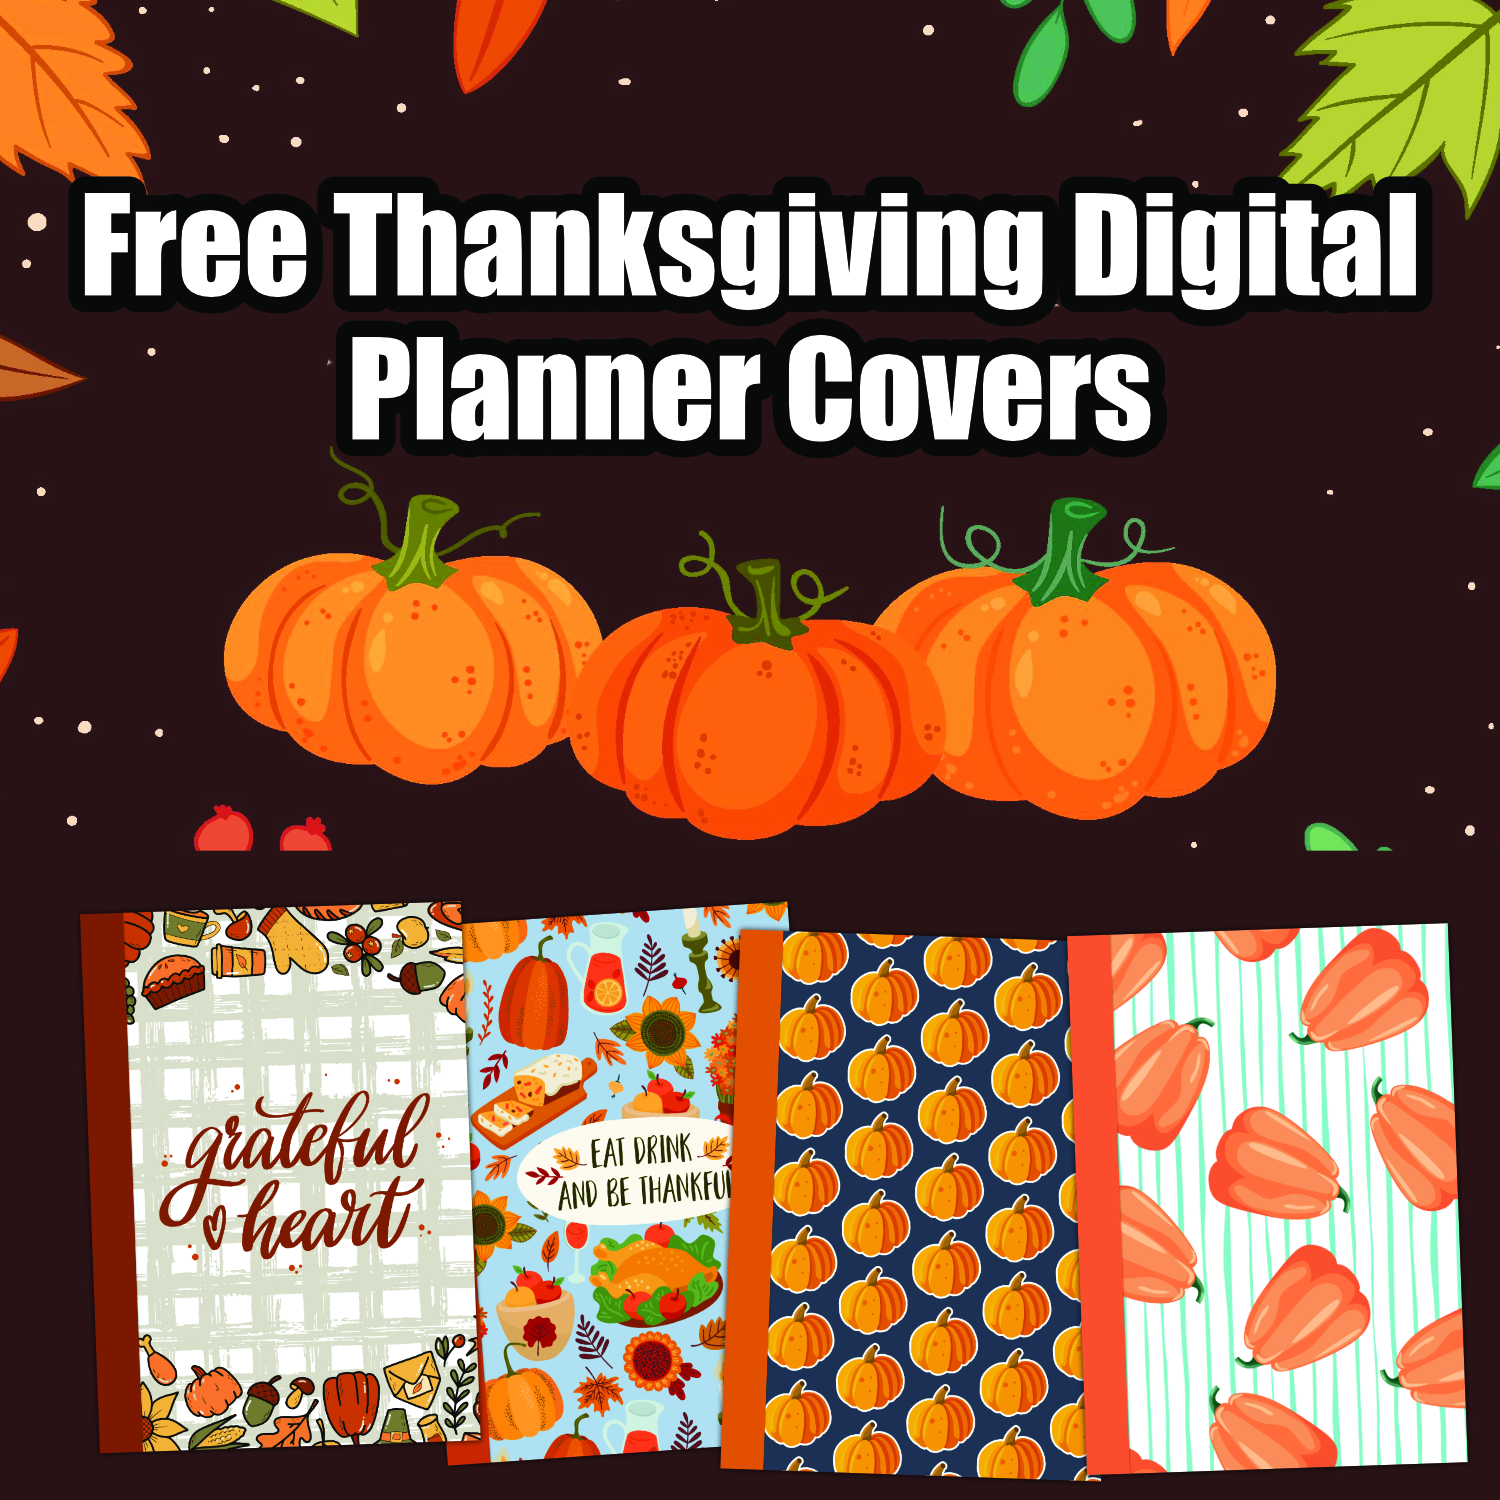 Free Thanksgiving Digital Planner Covers